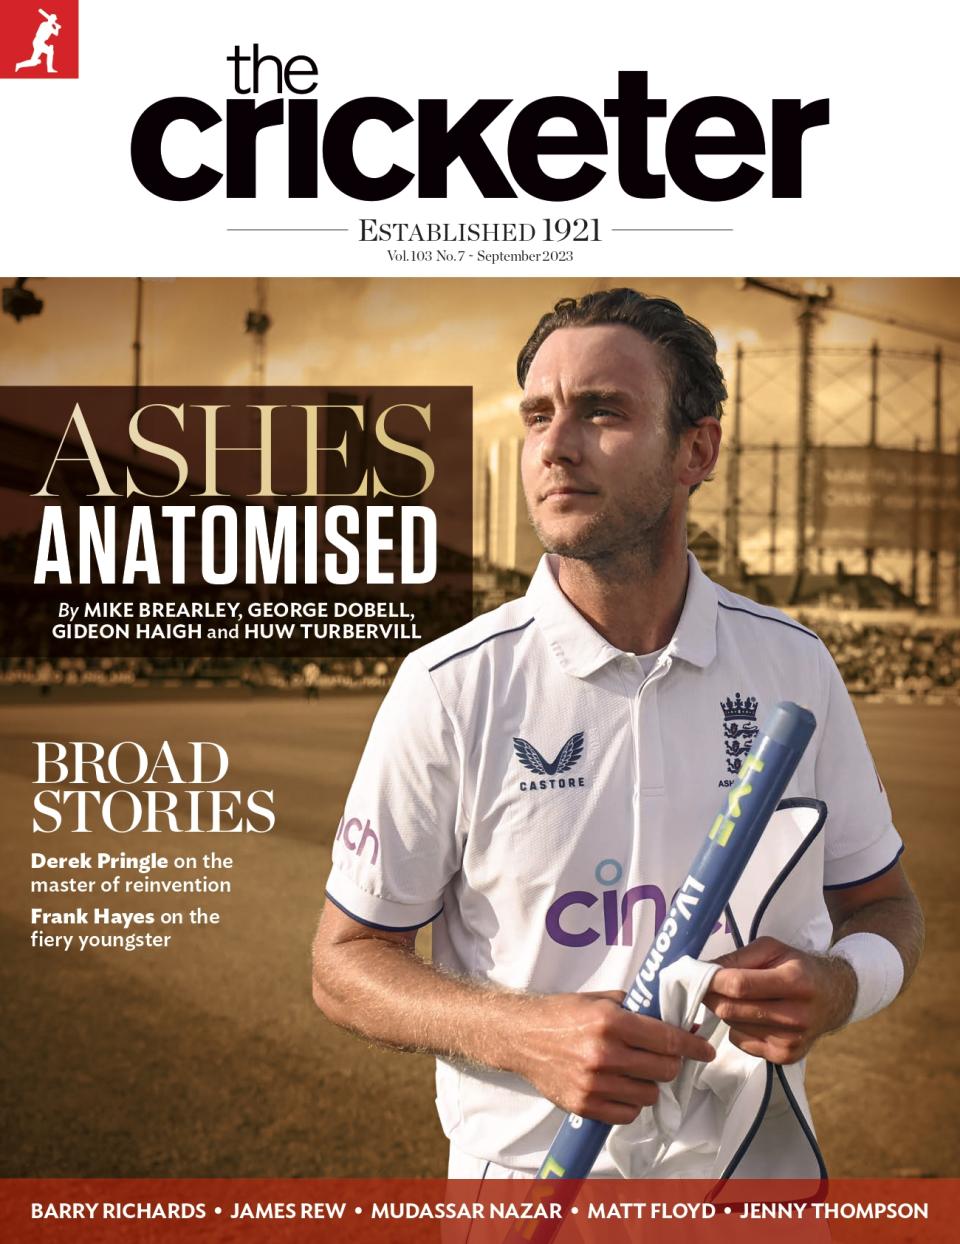 The September issue of The Cricketer following a pulsating Ashes series. Photo: The Cricketer 